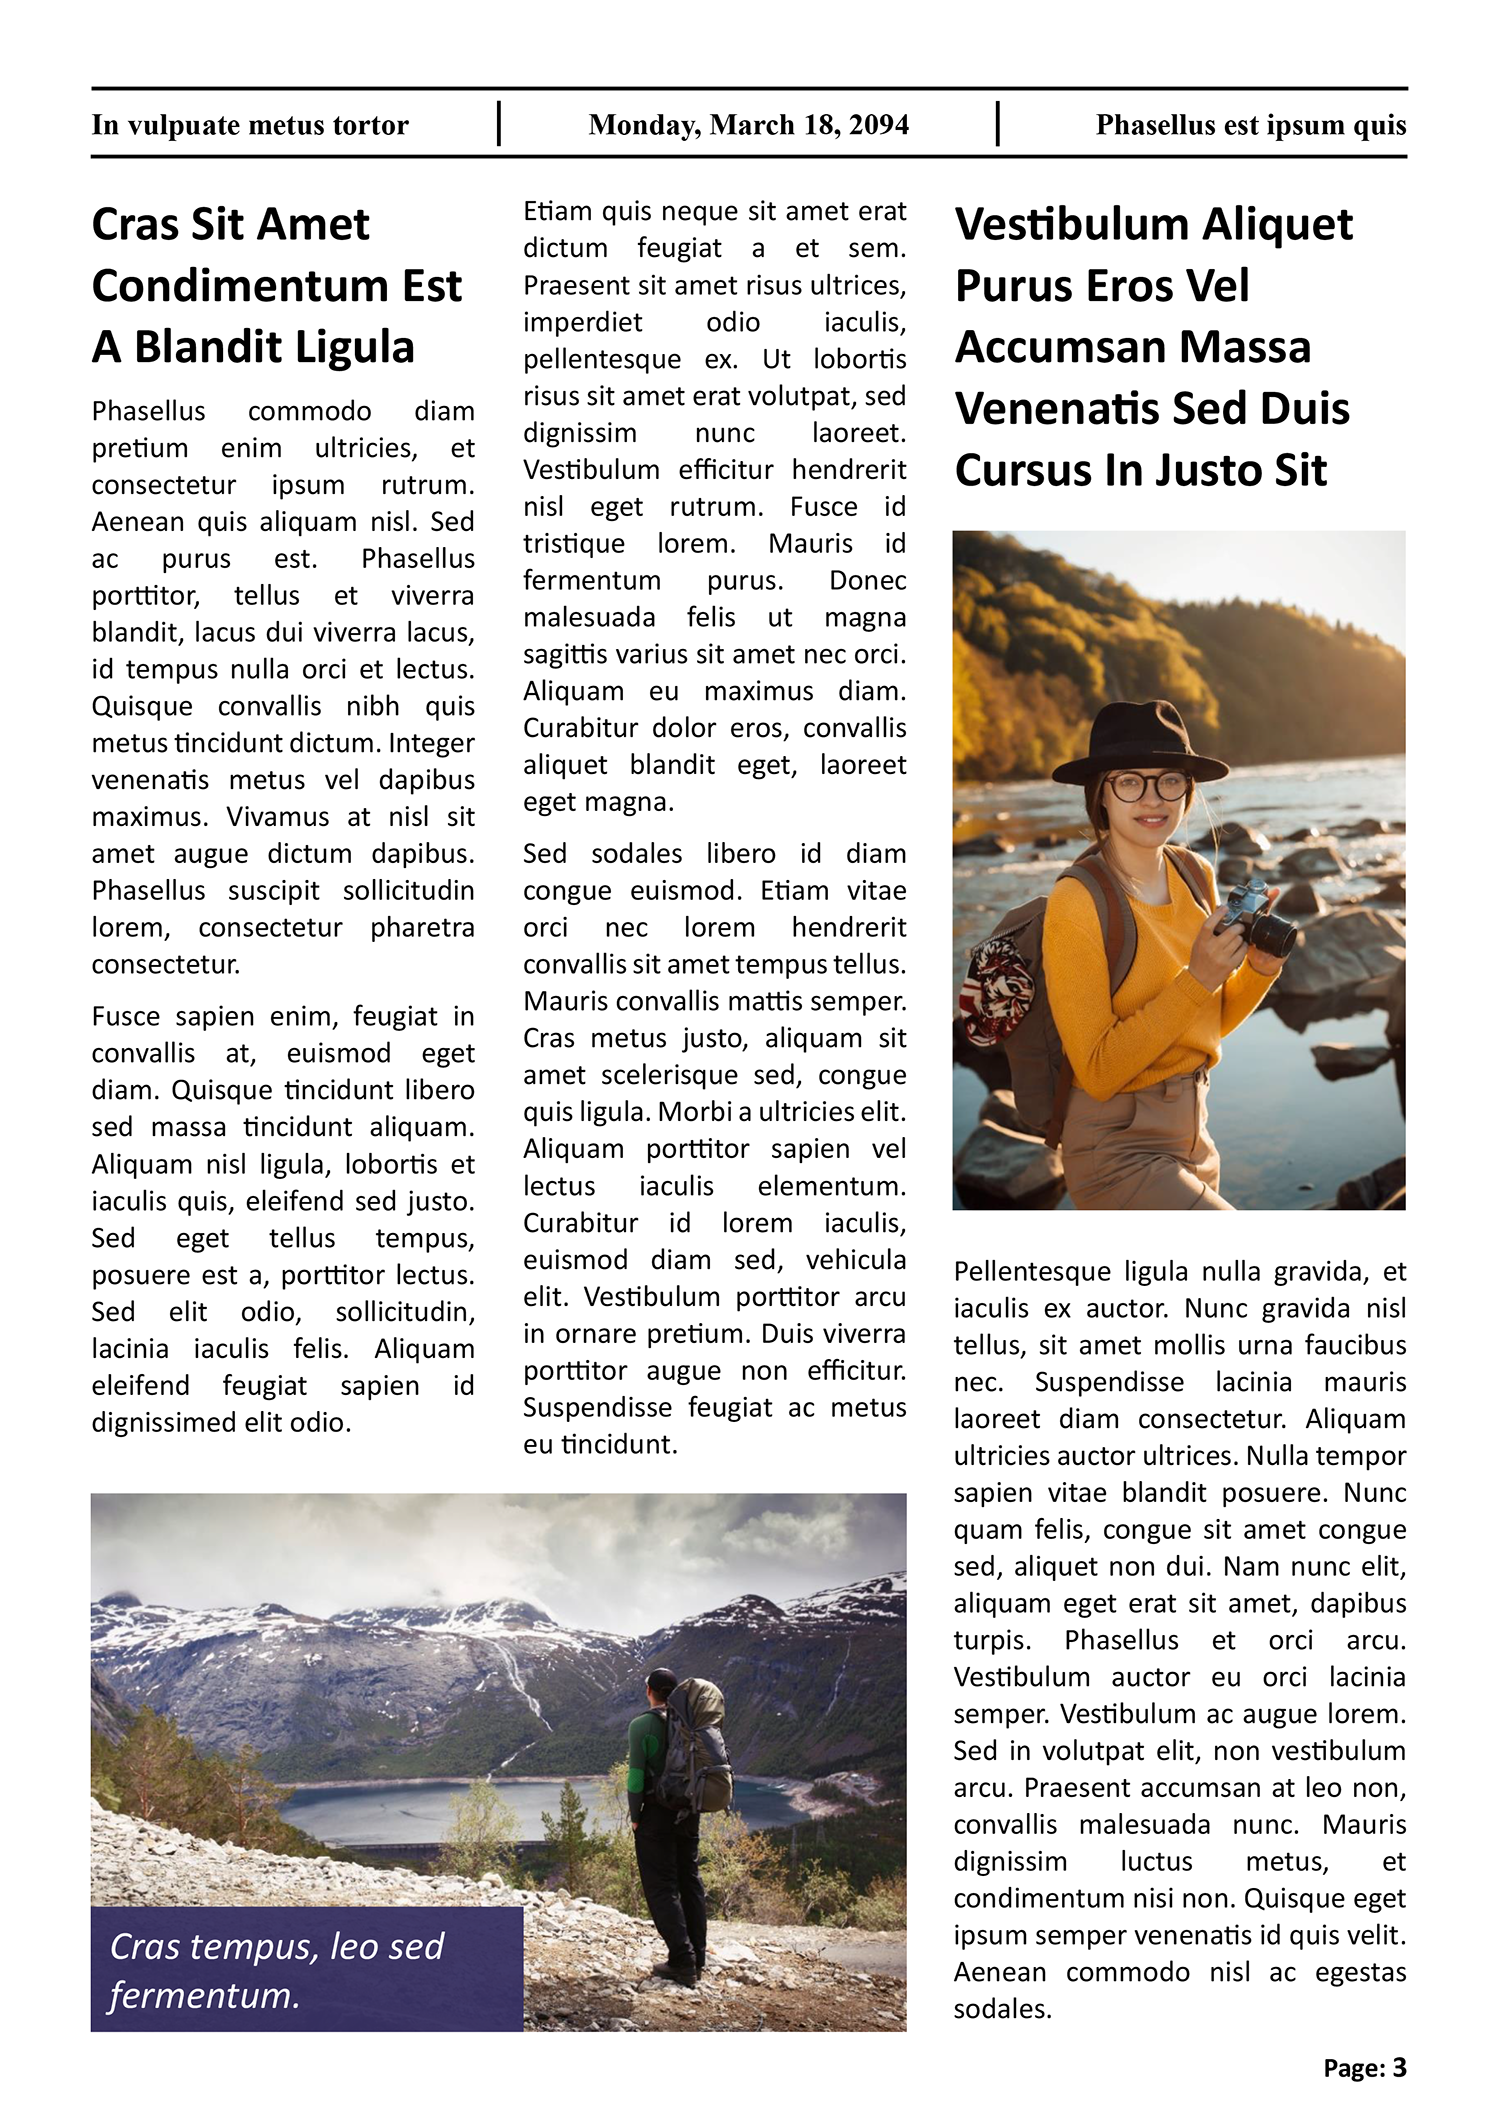 Travel Themed Newspaper Article Template - Page 03